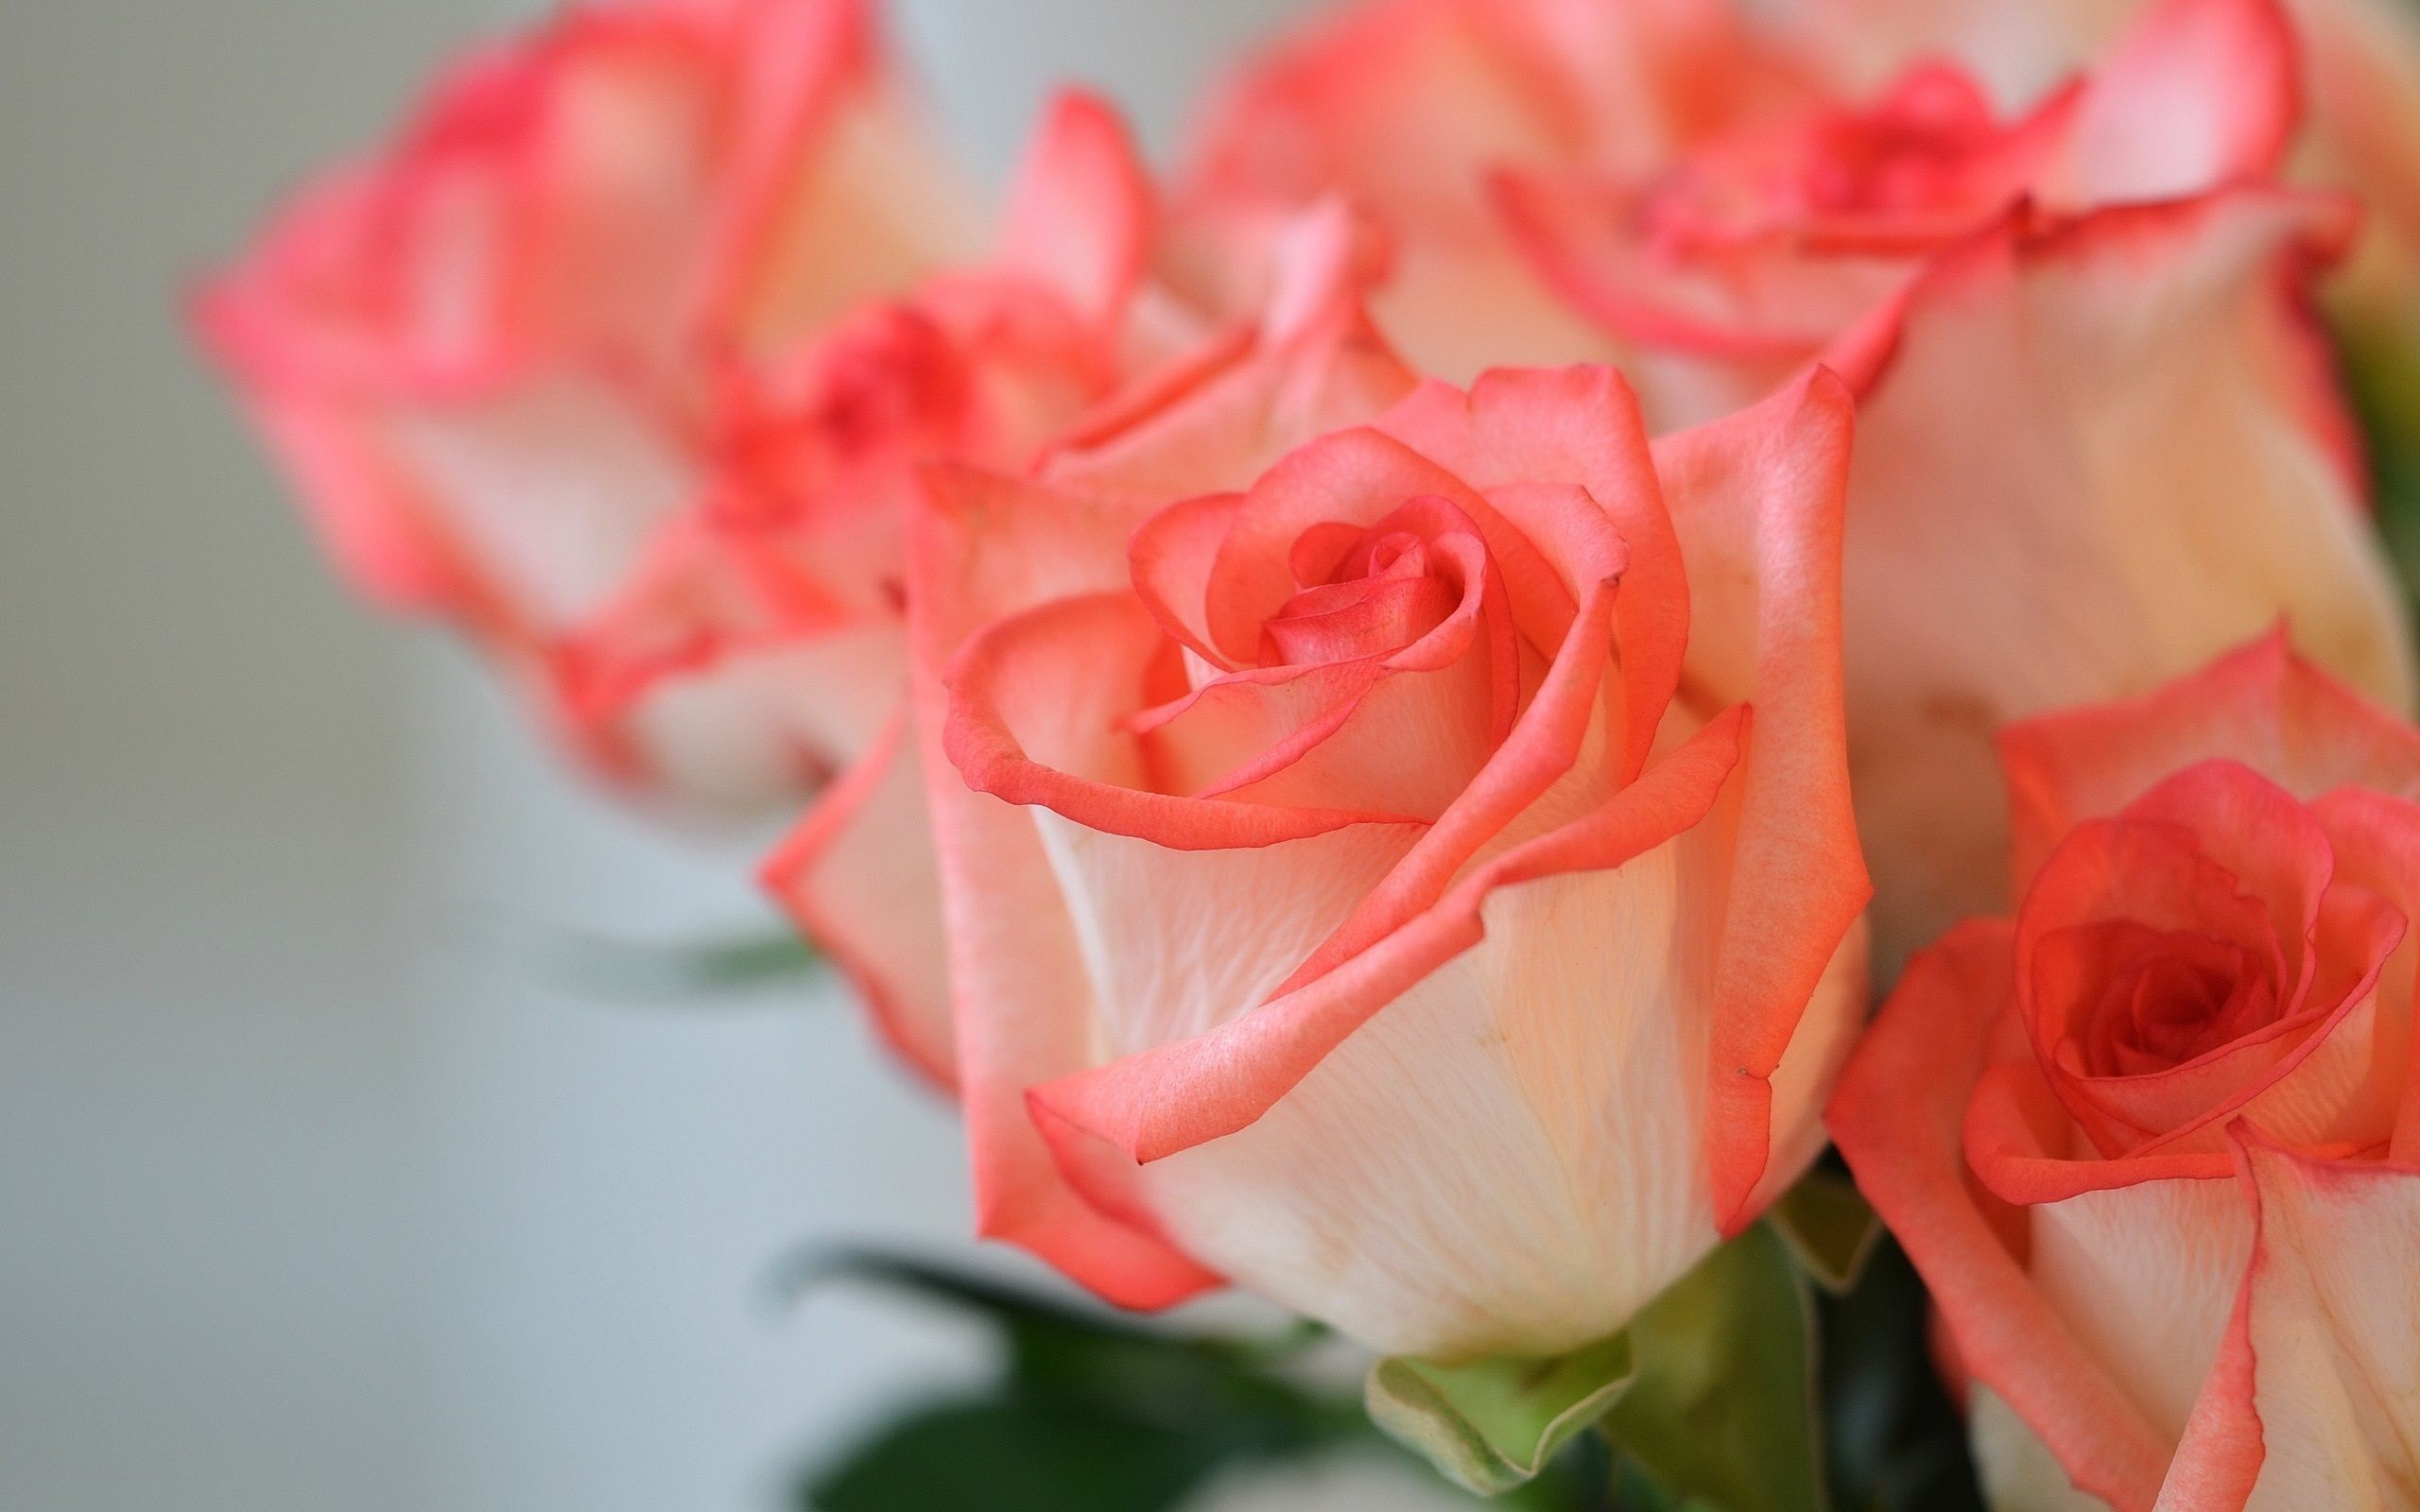 2560x1600 Beautiful bouquet - pink roses Beautiful Pink Roses Bouquet In Basket Stock  Photo - Image: 42290498